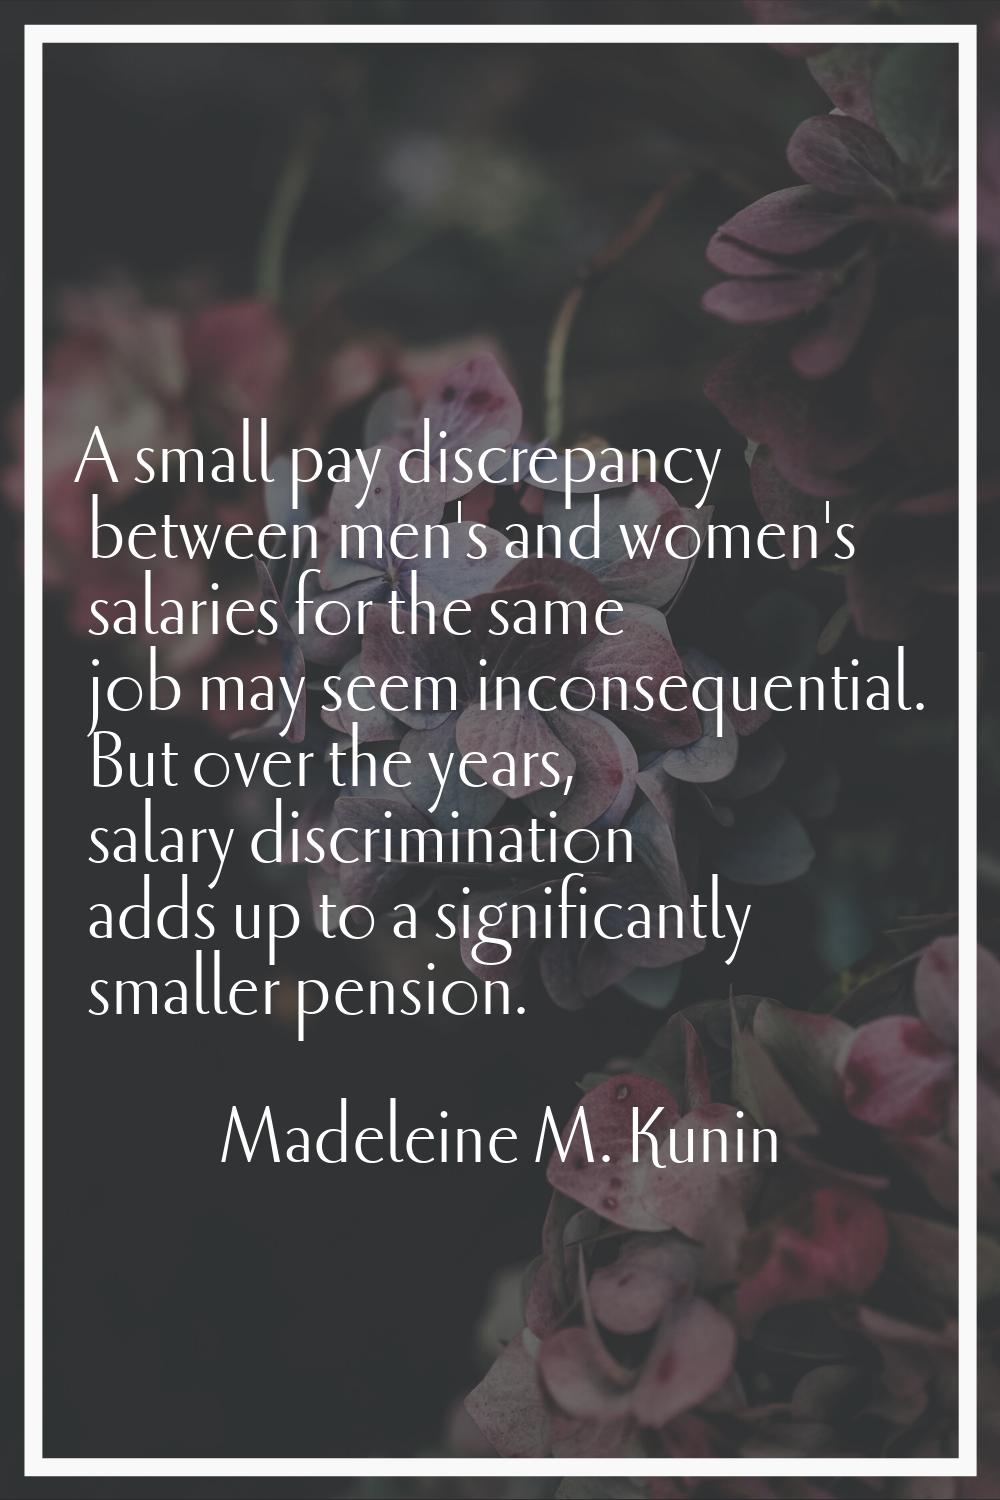 A small pay discrepancy between men's and women's salaries for the same job may seem inconsequentia